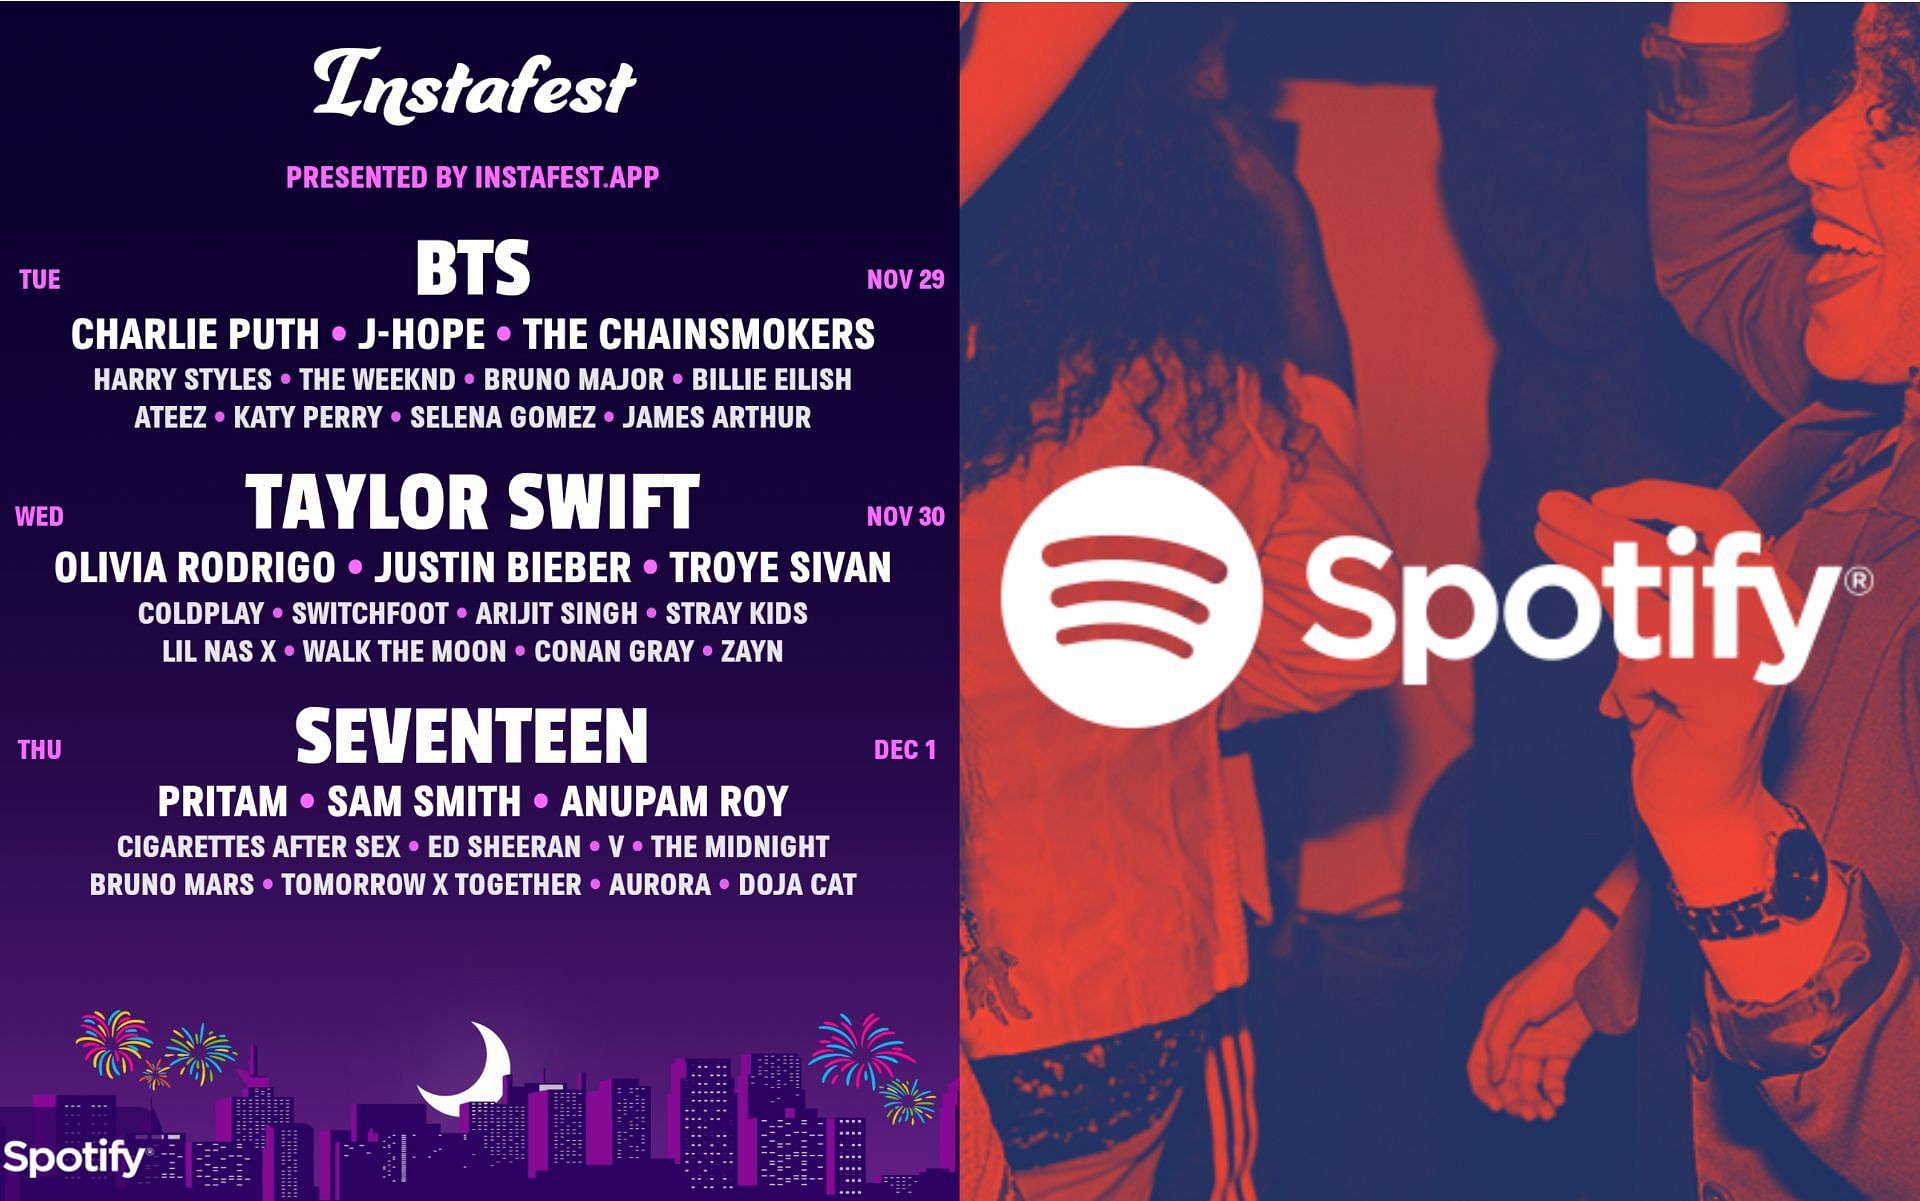 Spotify Spotify Instafest Steps to create your own fake music